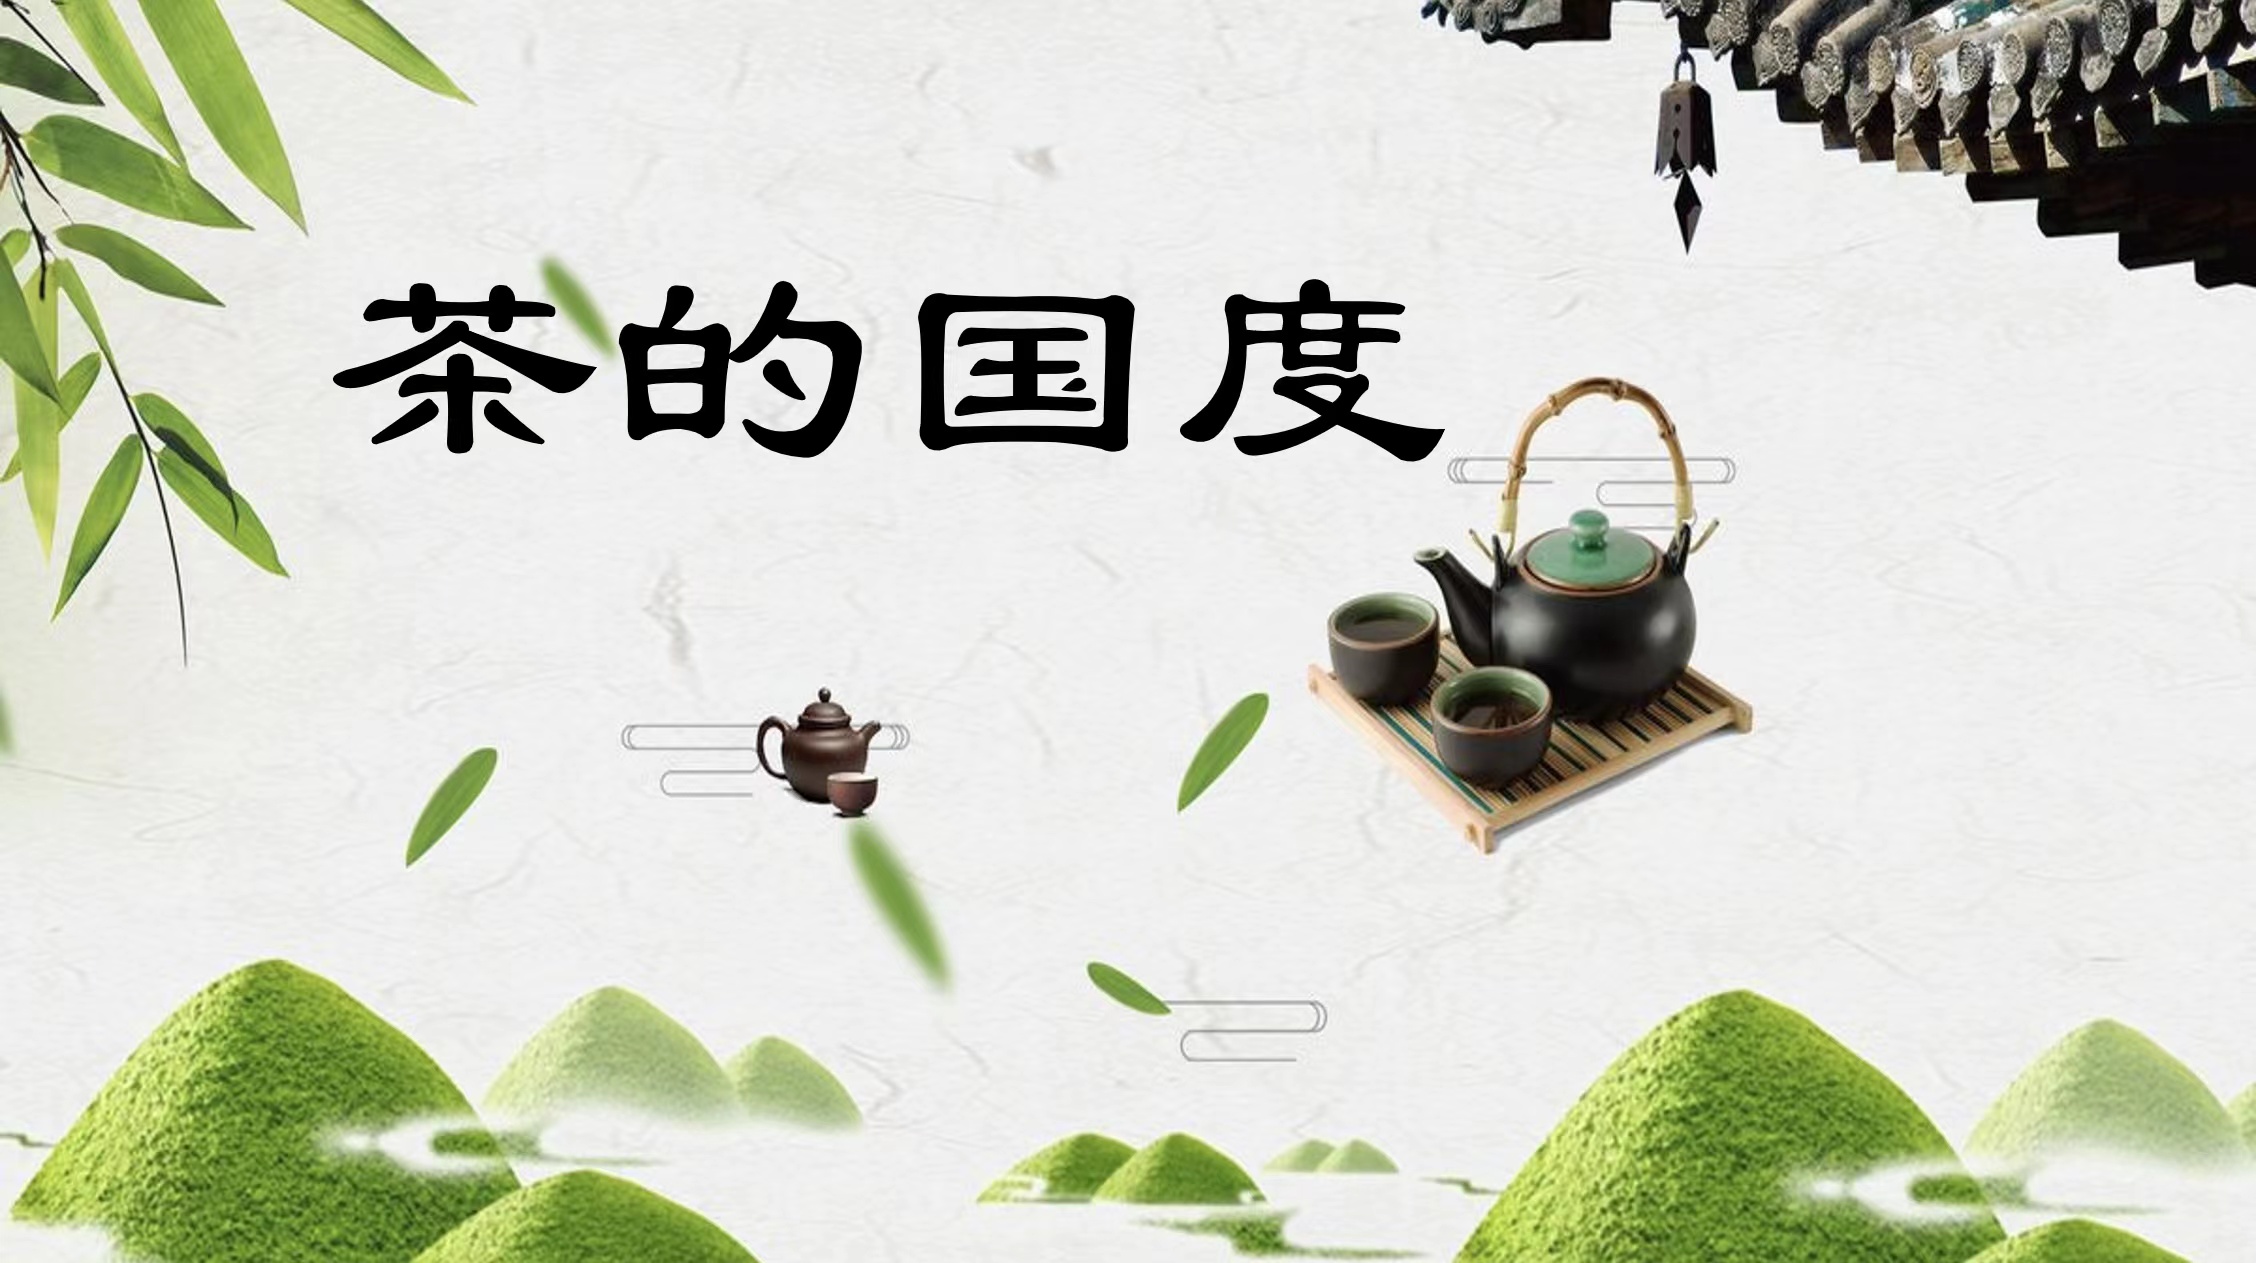 Walking in China Advanced Chinese 1: The Kingdom of Tea